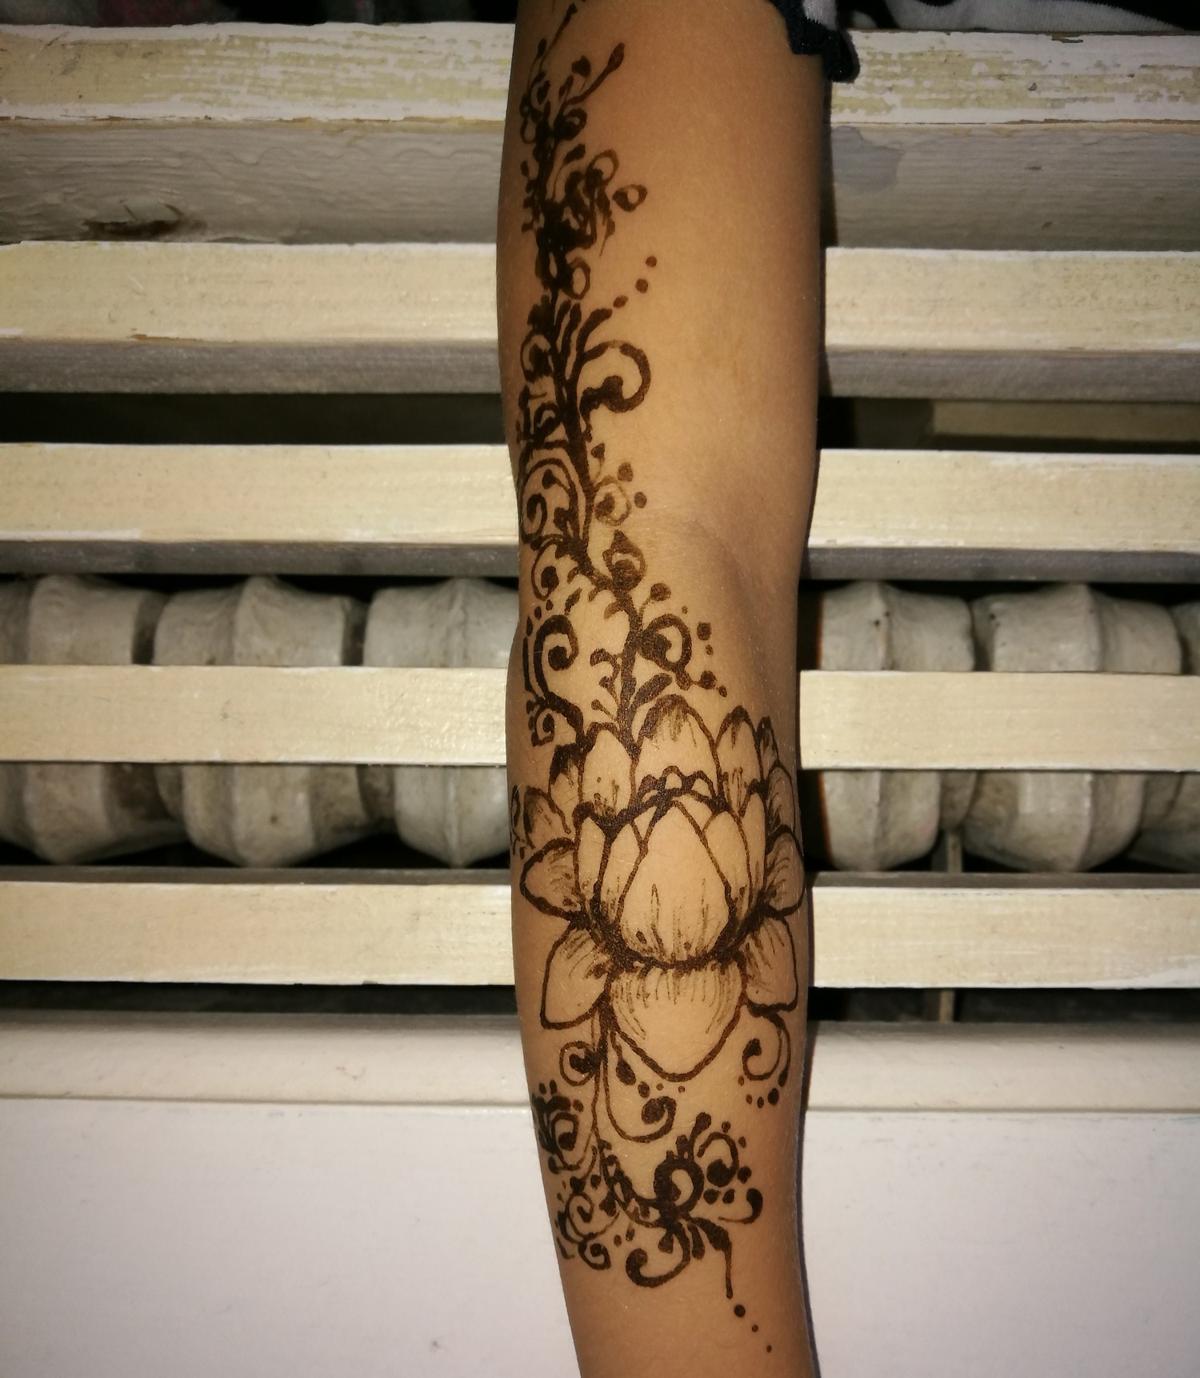 Lotus Tattoo Meaning - Thoughtful Tattoos